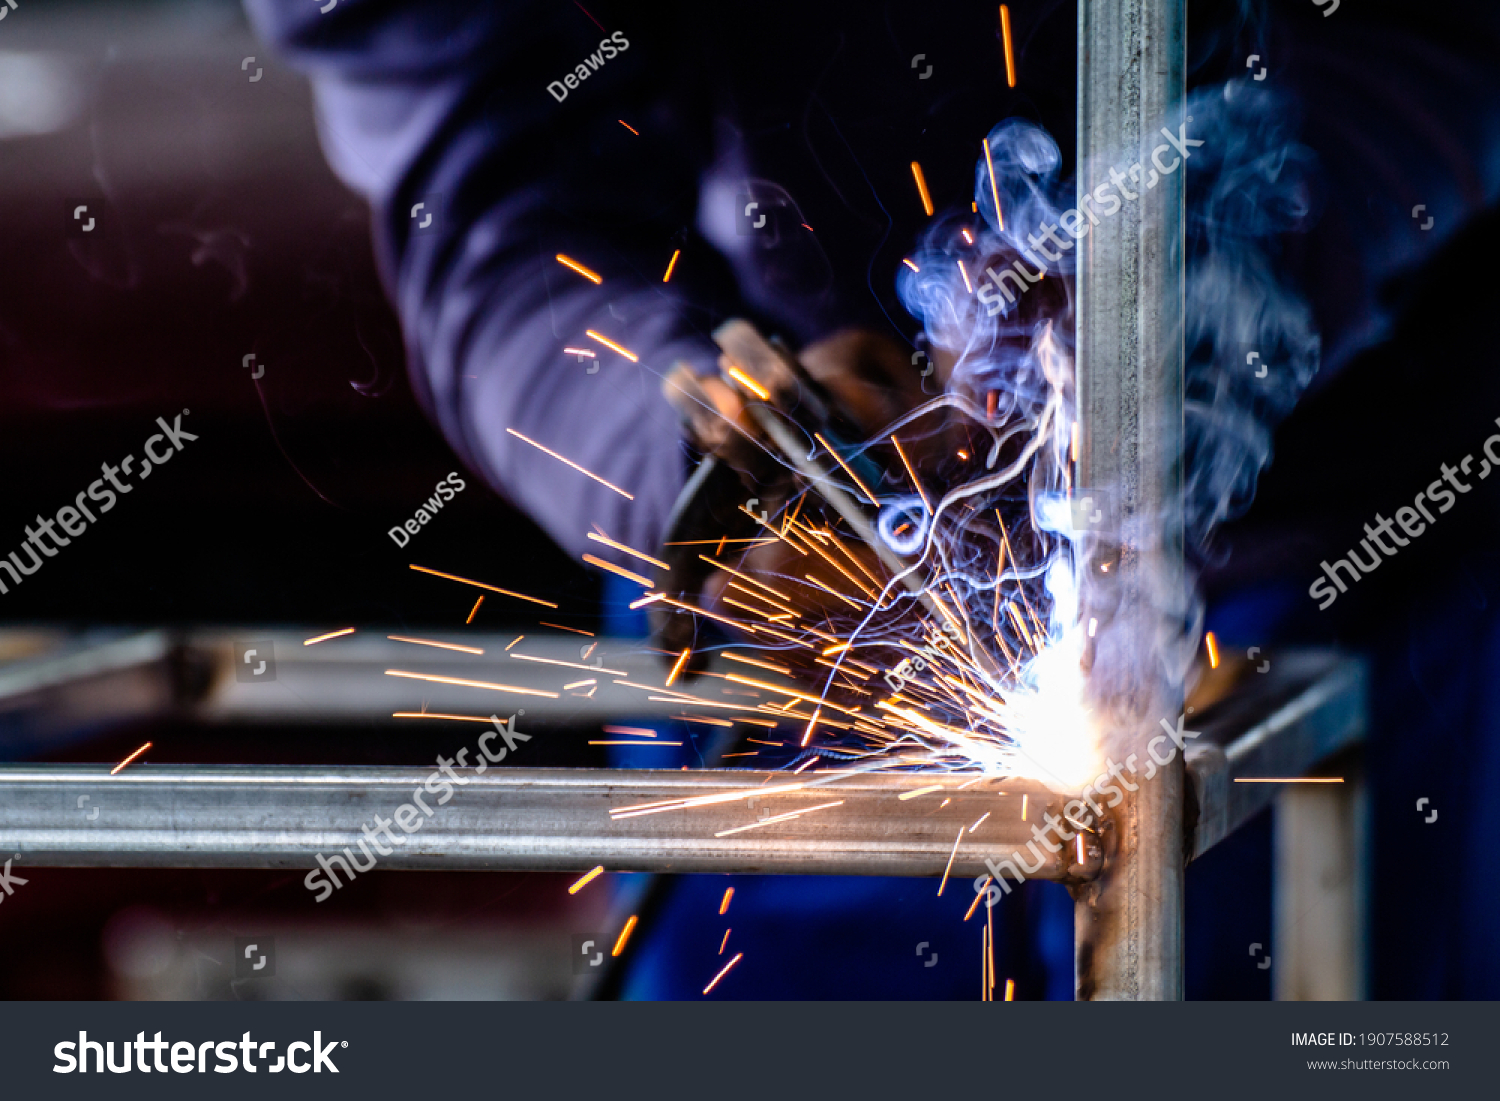 welder and welding sparks, construction and metal work industrial concept, metal welding with sparks, laborer or labor day concept #1907588512